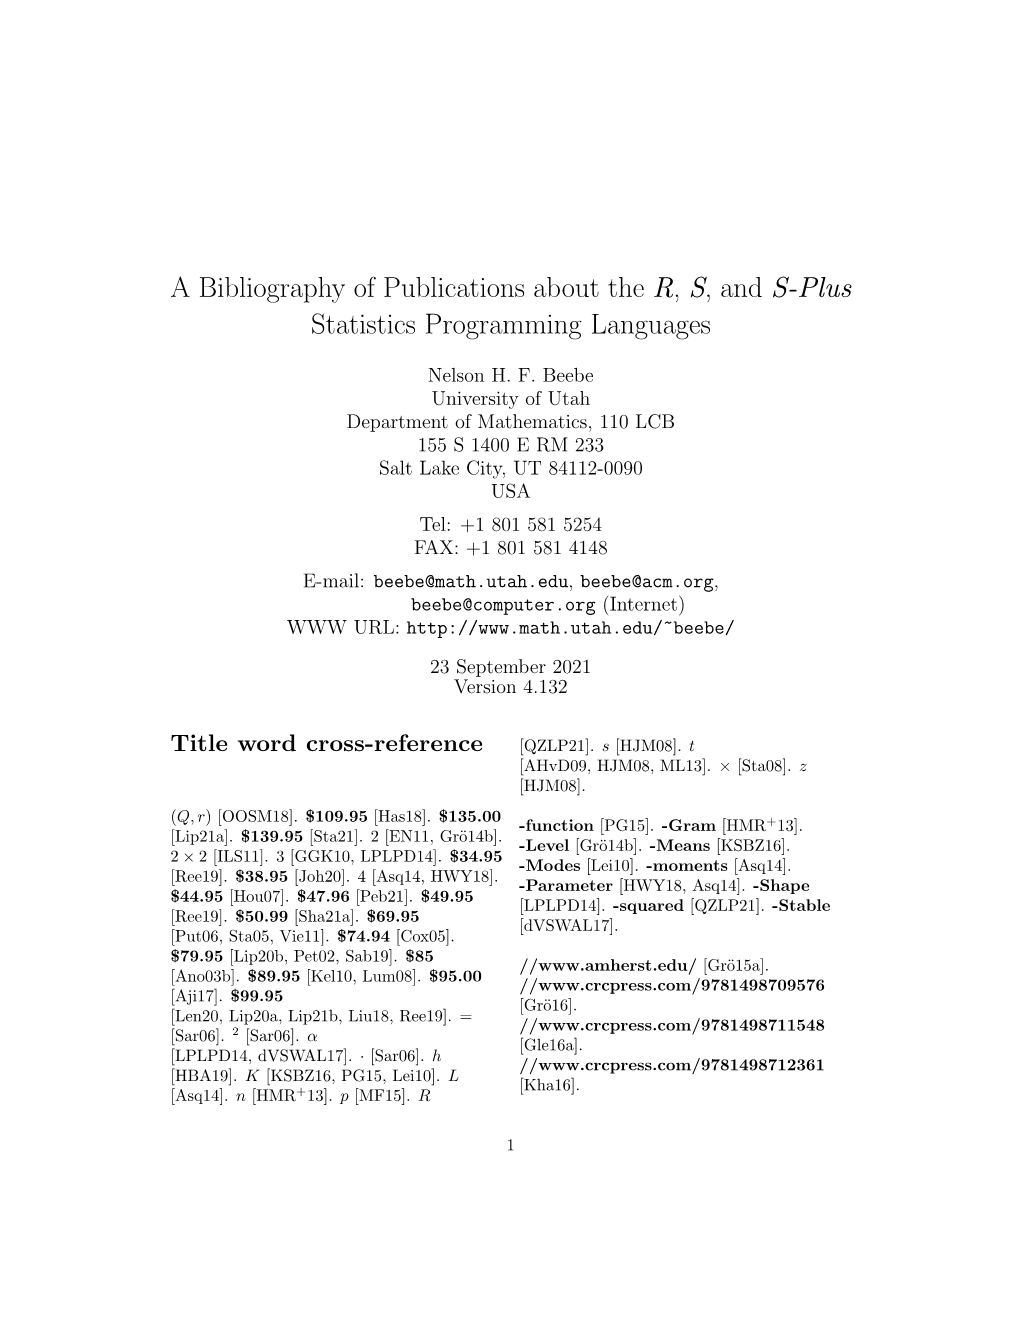 A Bibliography of Publications About the R, S, and S-Plus Statistics Programming Languages